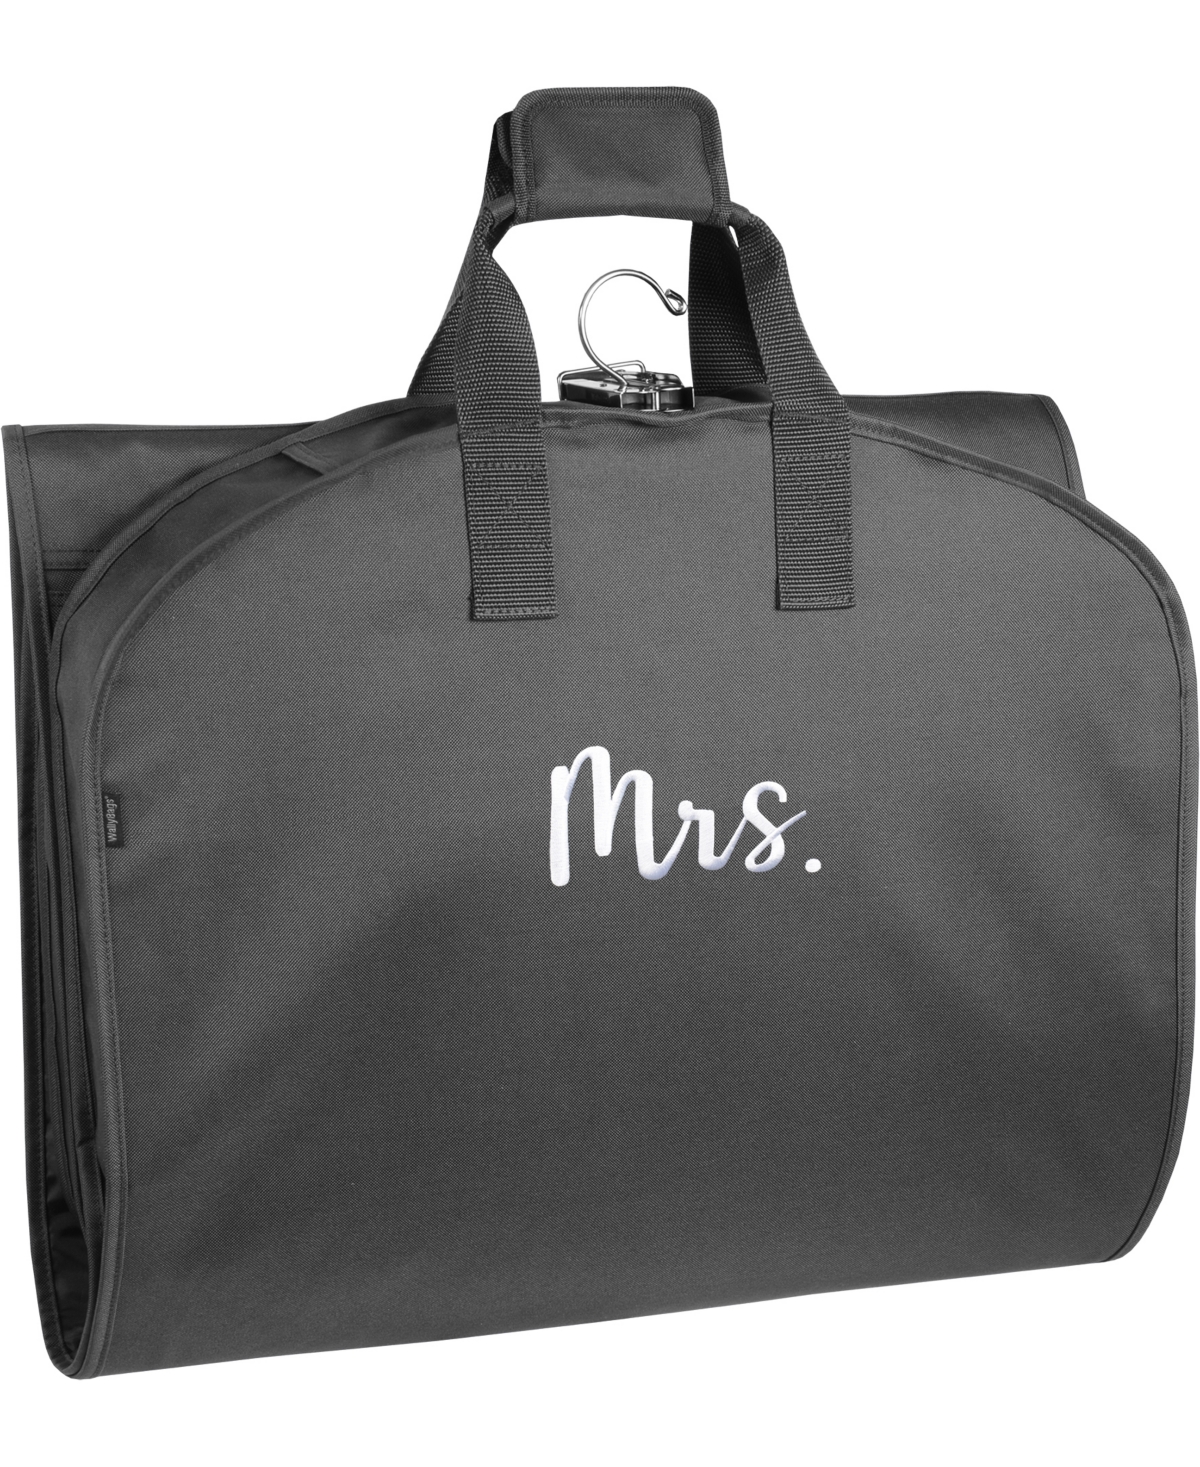 Wallybags 60" Premium Tri-fold Travel Garment Bag With Pocket And Mrs. Embroidery In Black - M